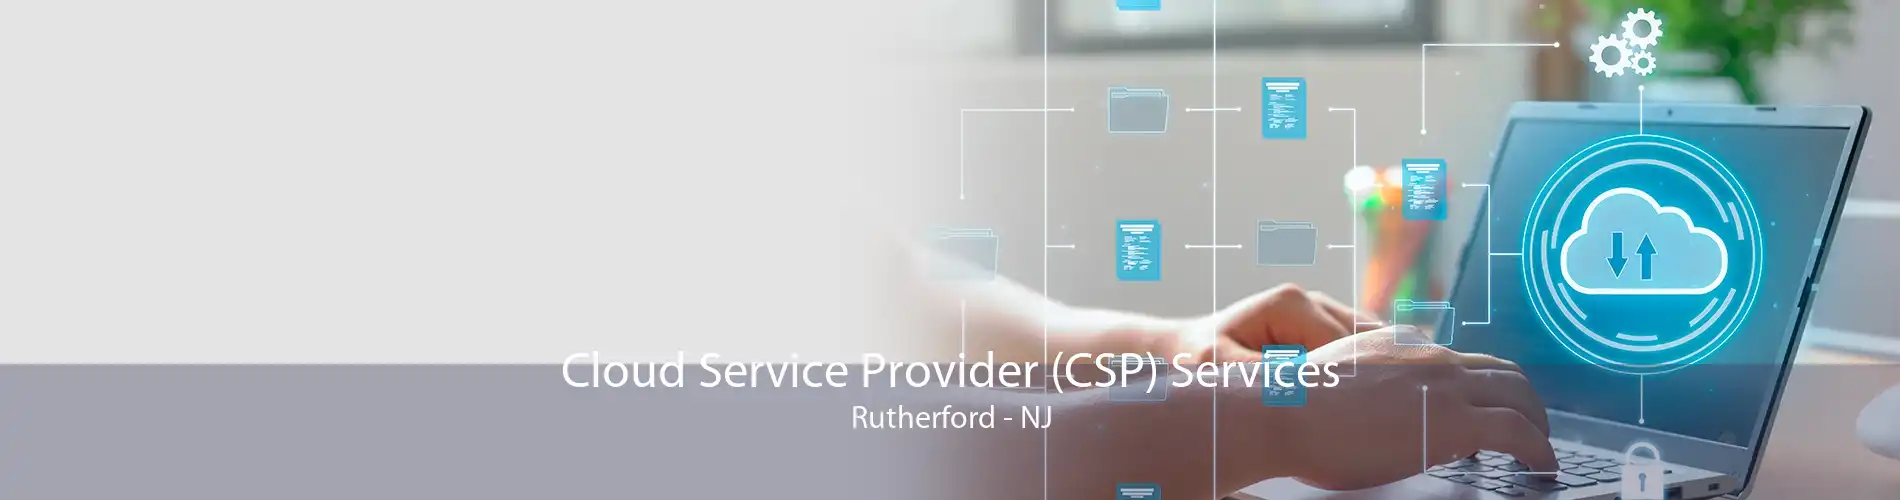 Cloud Service Provider (CSP) Services Rutherford - NJ